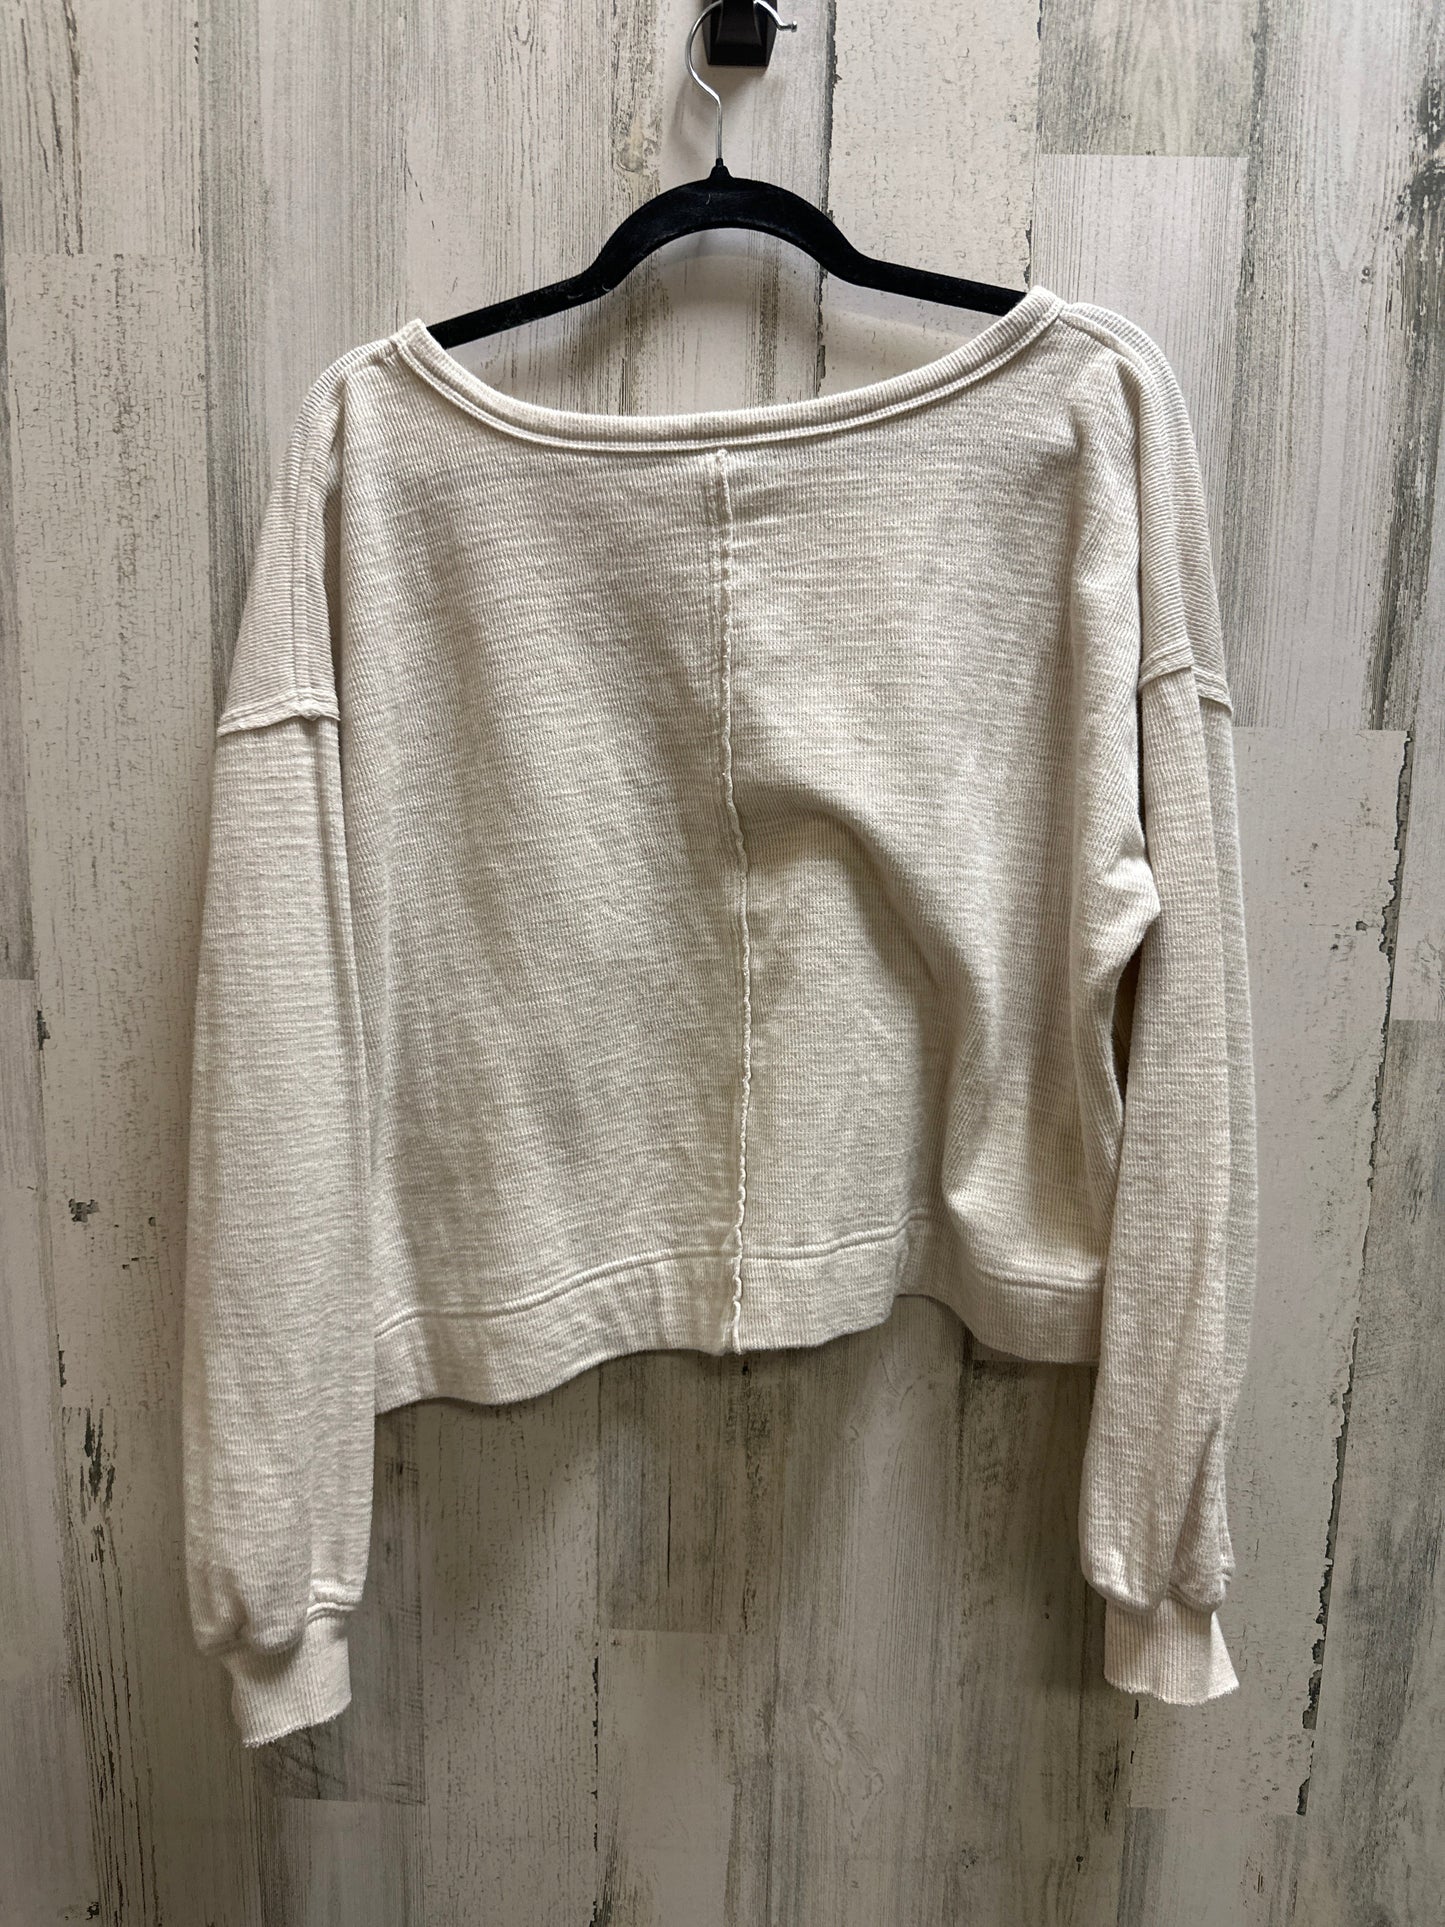 Tan Top Long Sleeve Aerie, Size S